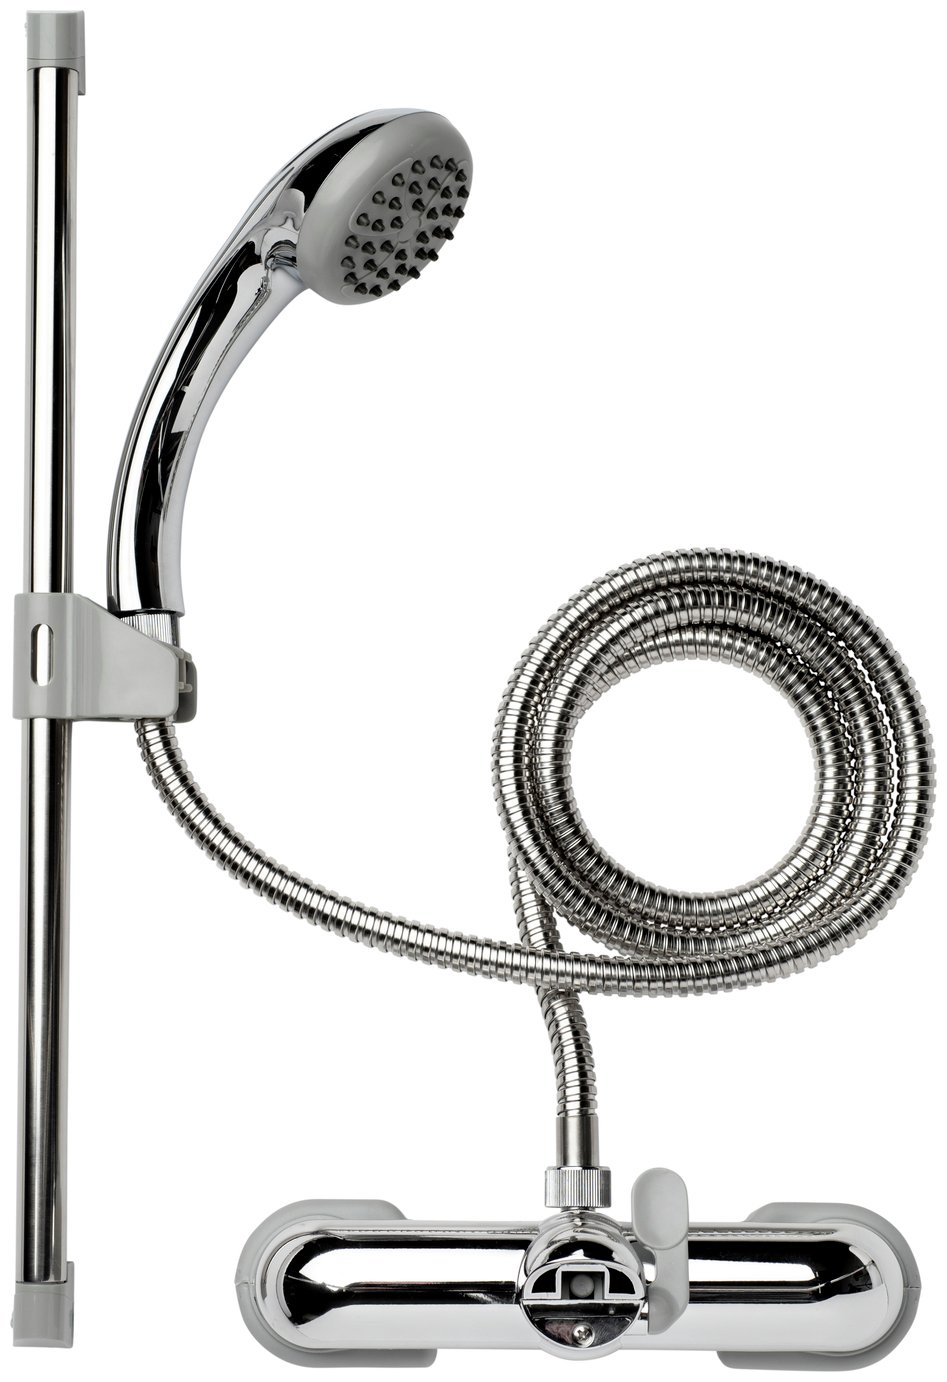 Croydex Bath and Shower Mixer Tap review